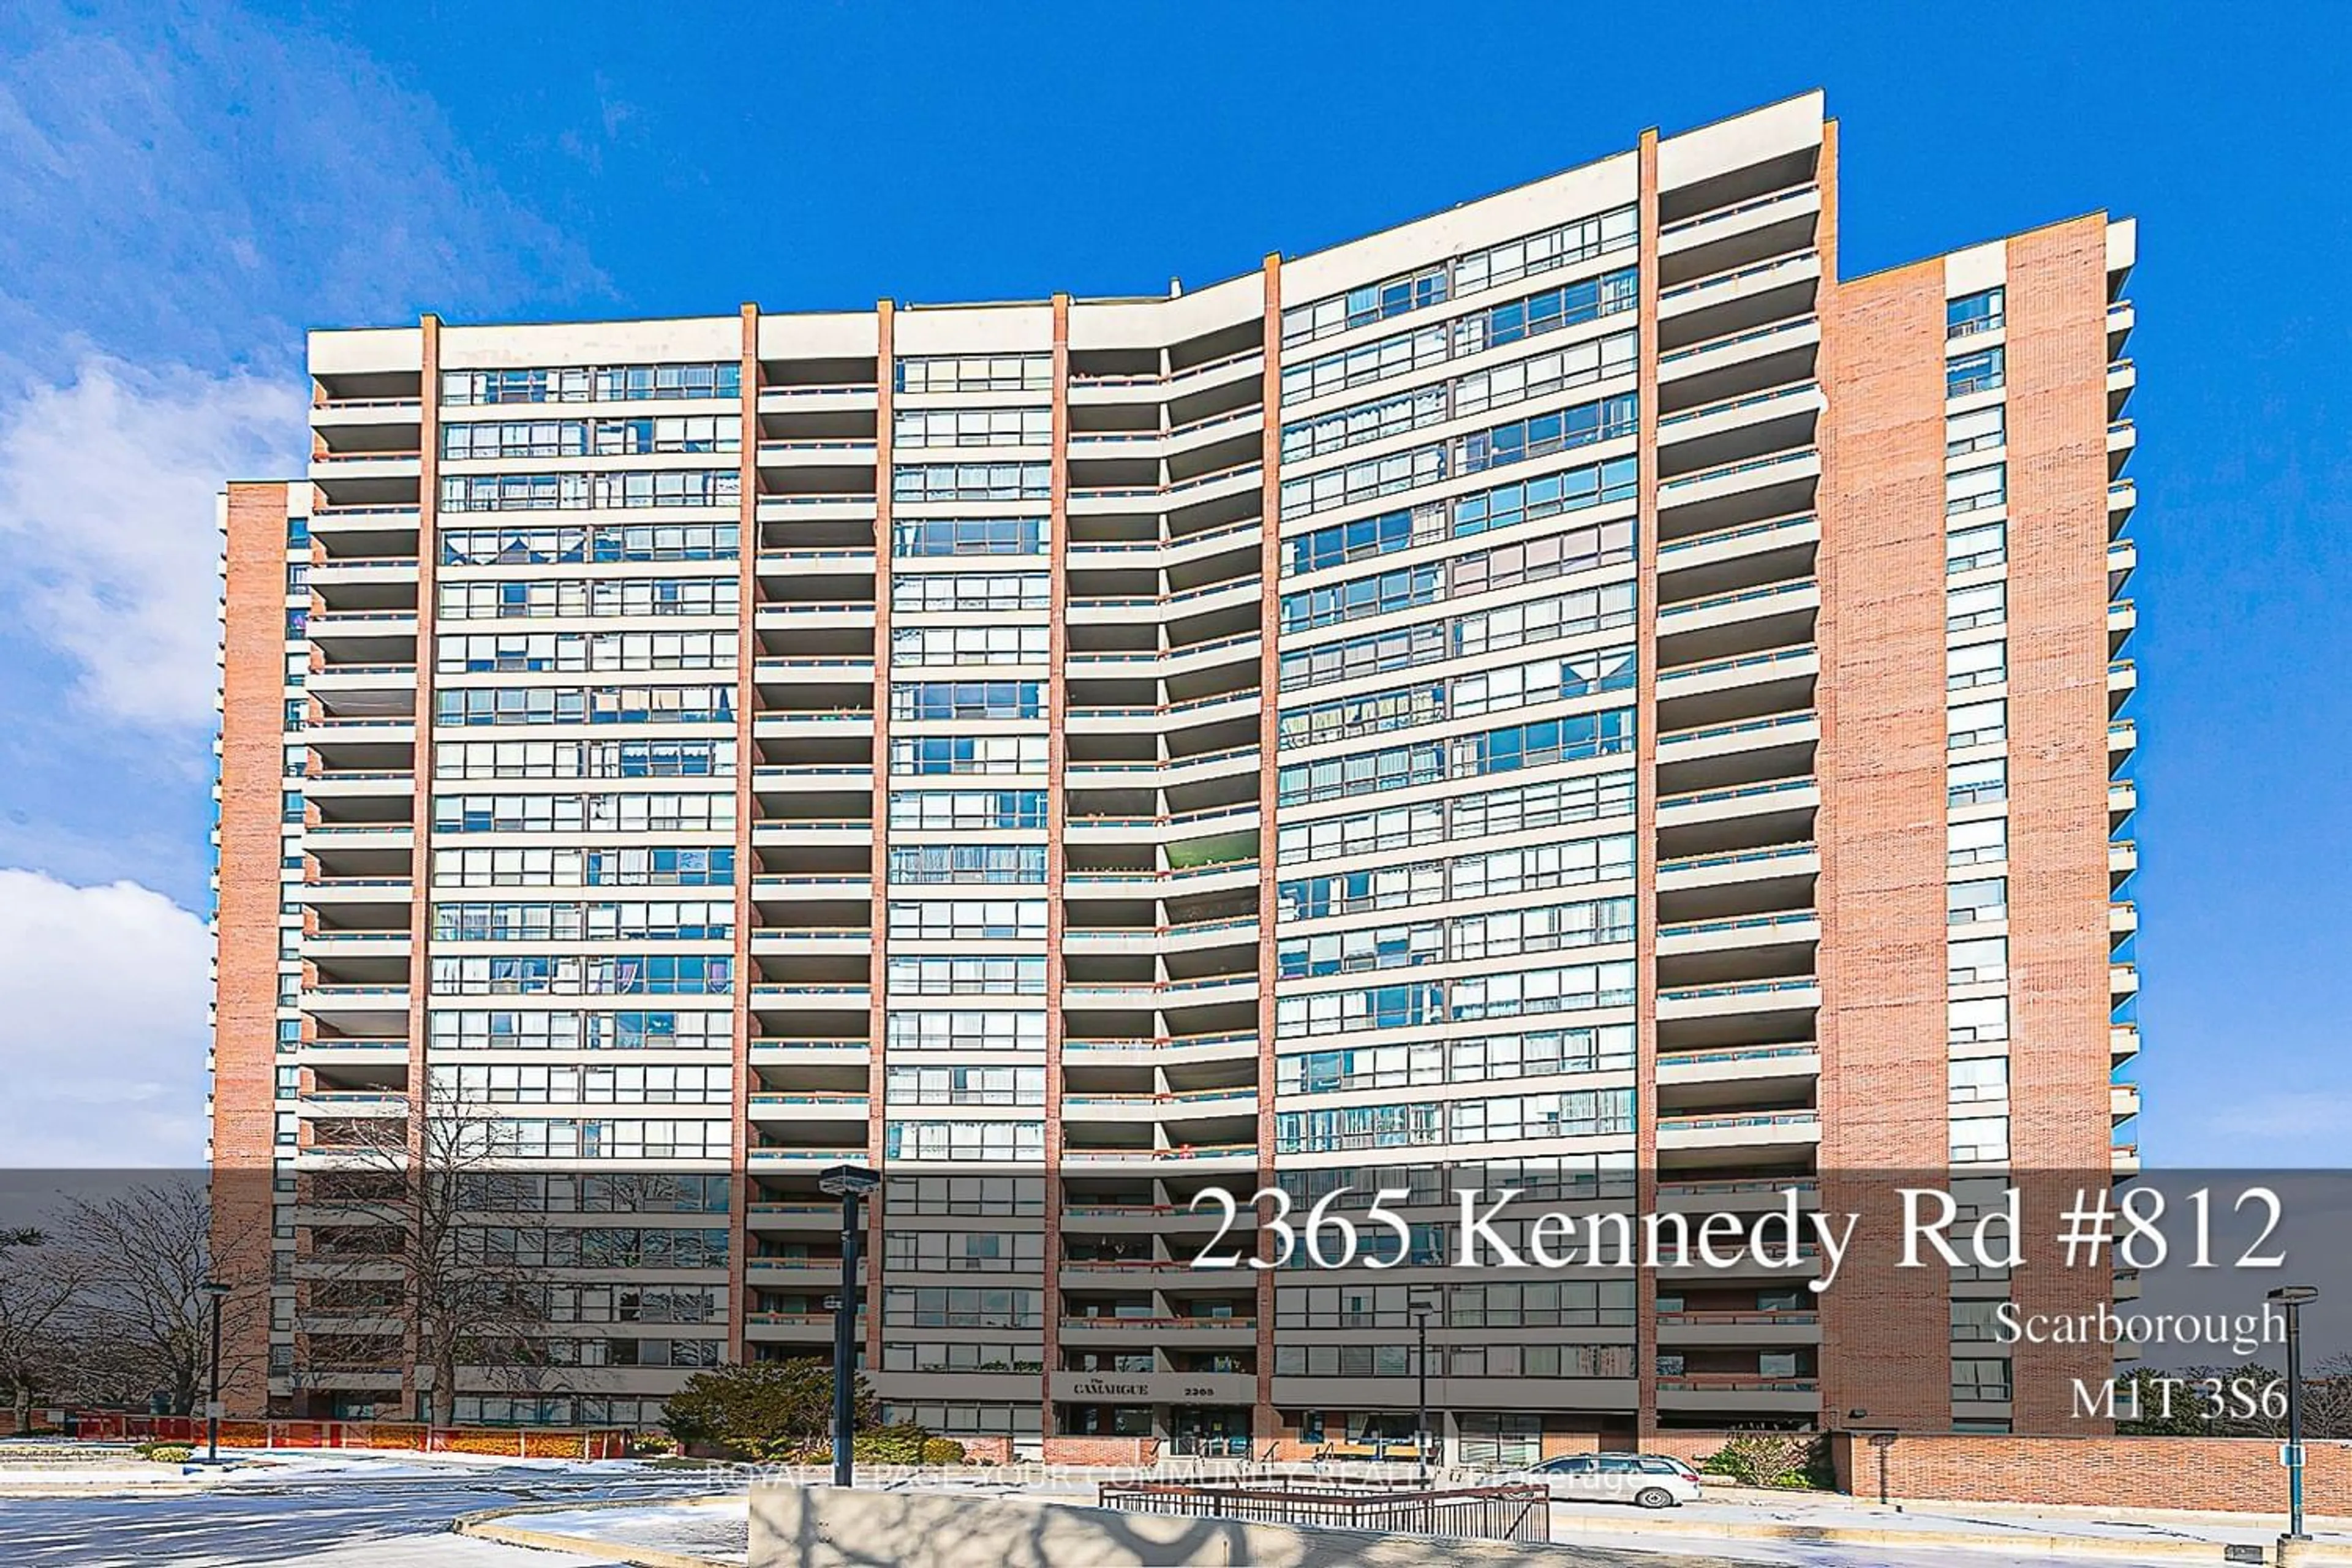 A pic from exterior of the house or condo for 2365 Kennedy Rd #812, Toronto Ontario M1T 3S6